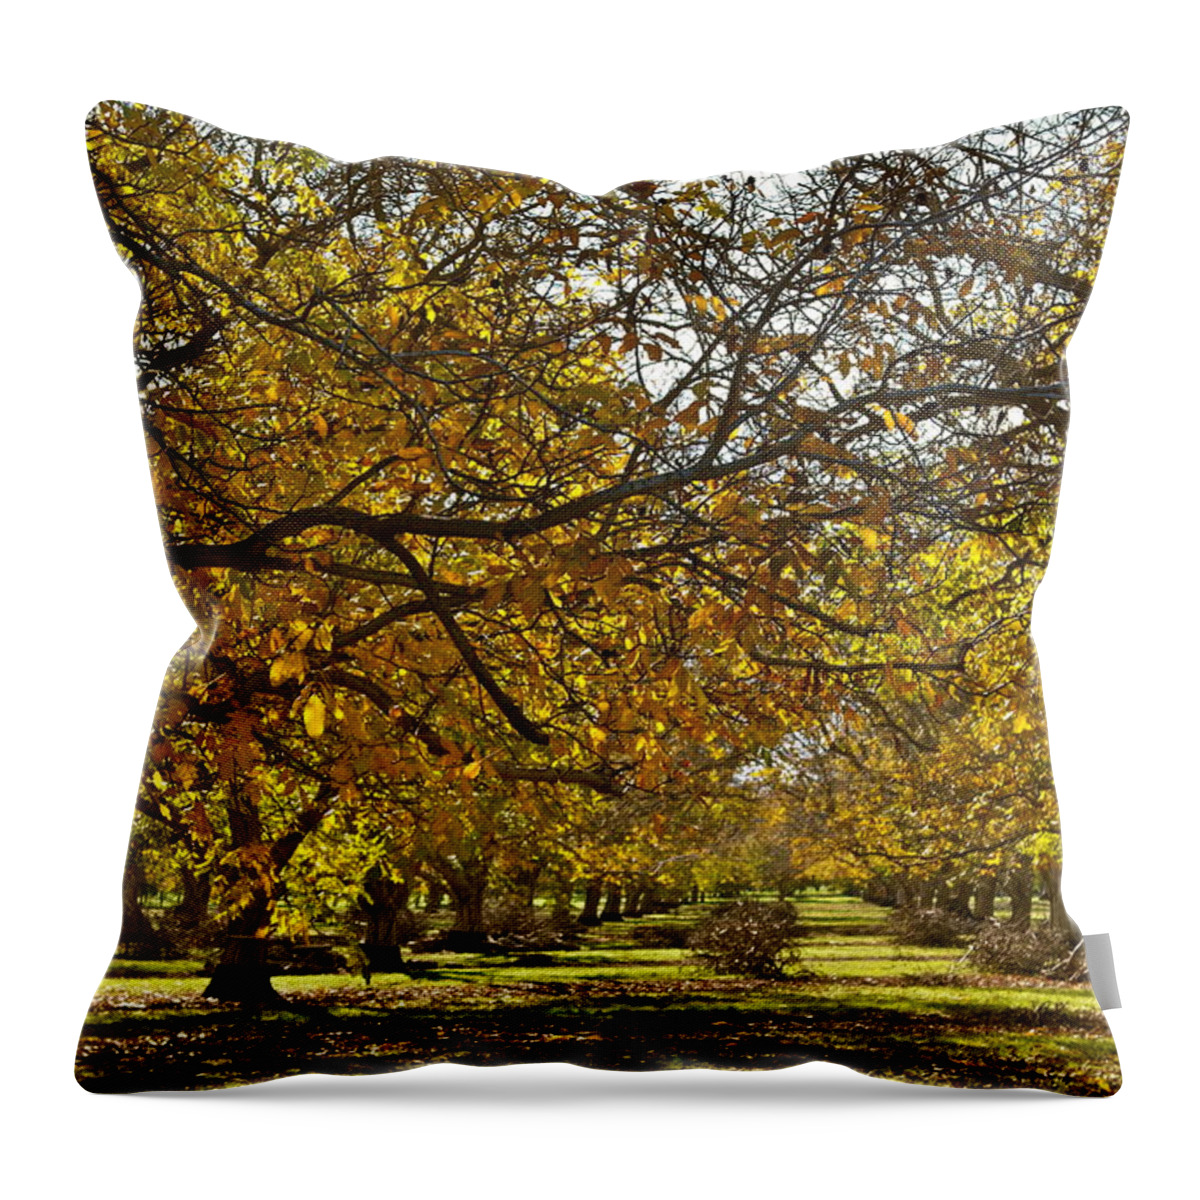 English Walnuts Throw Pillow featuring the photograph Golden Walnut Orchard by Michele Myers